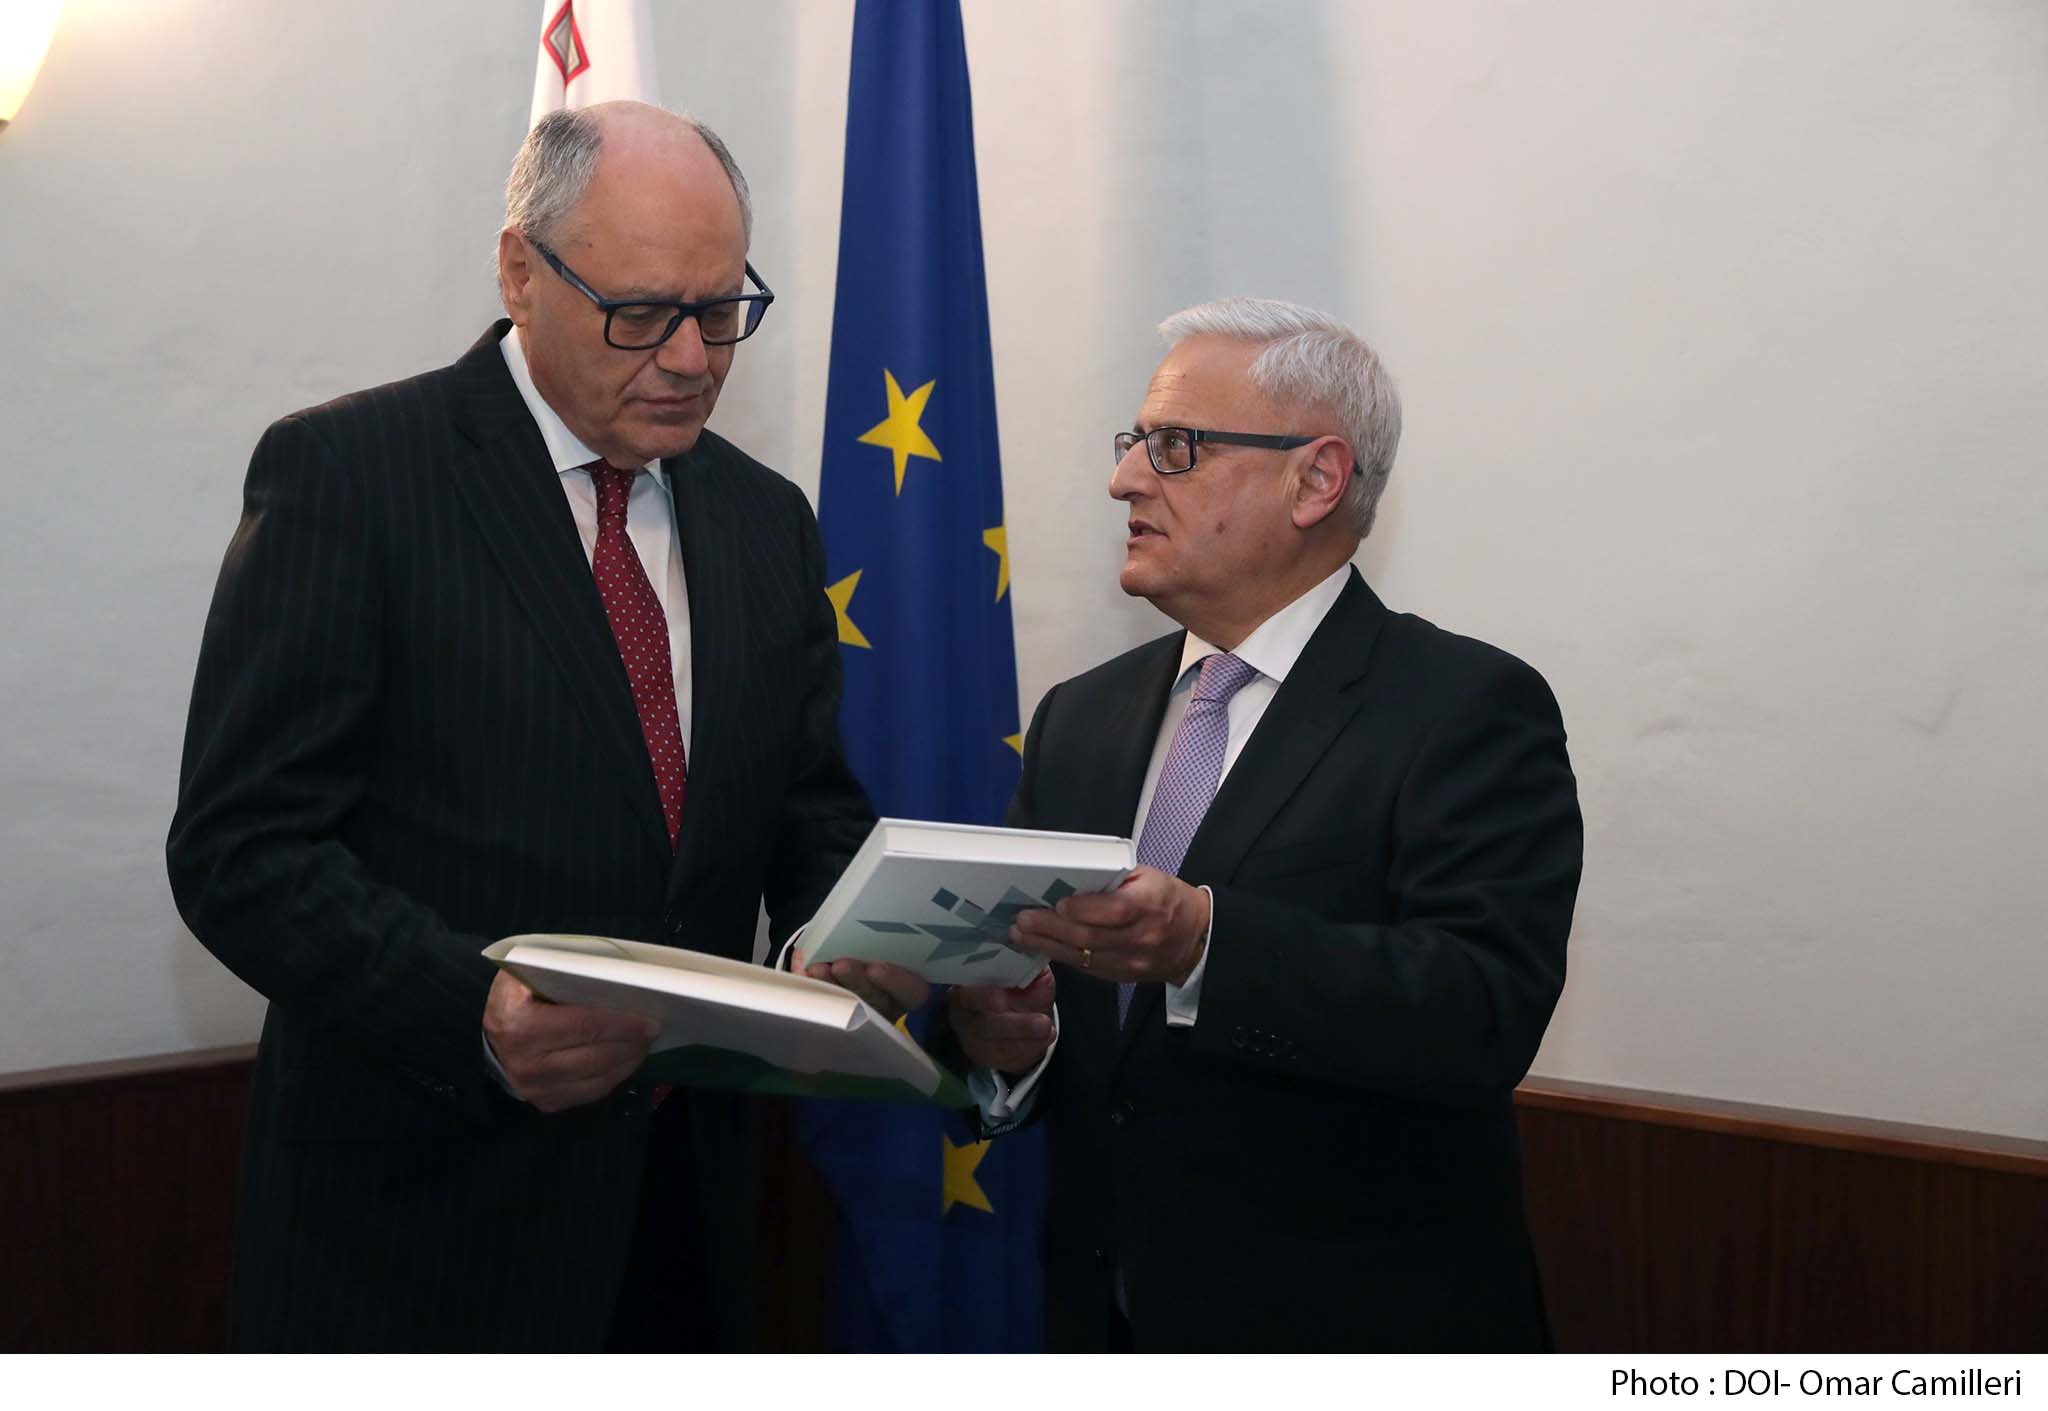 Meeting with Leo Brincat from the EU Court of Auditors